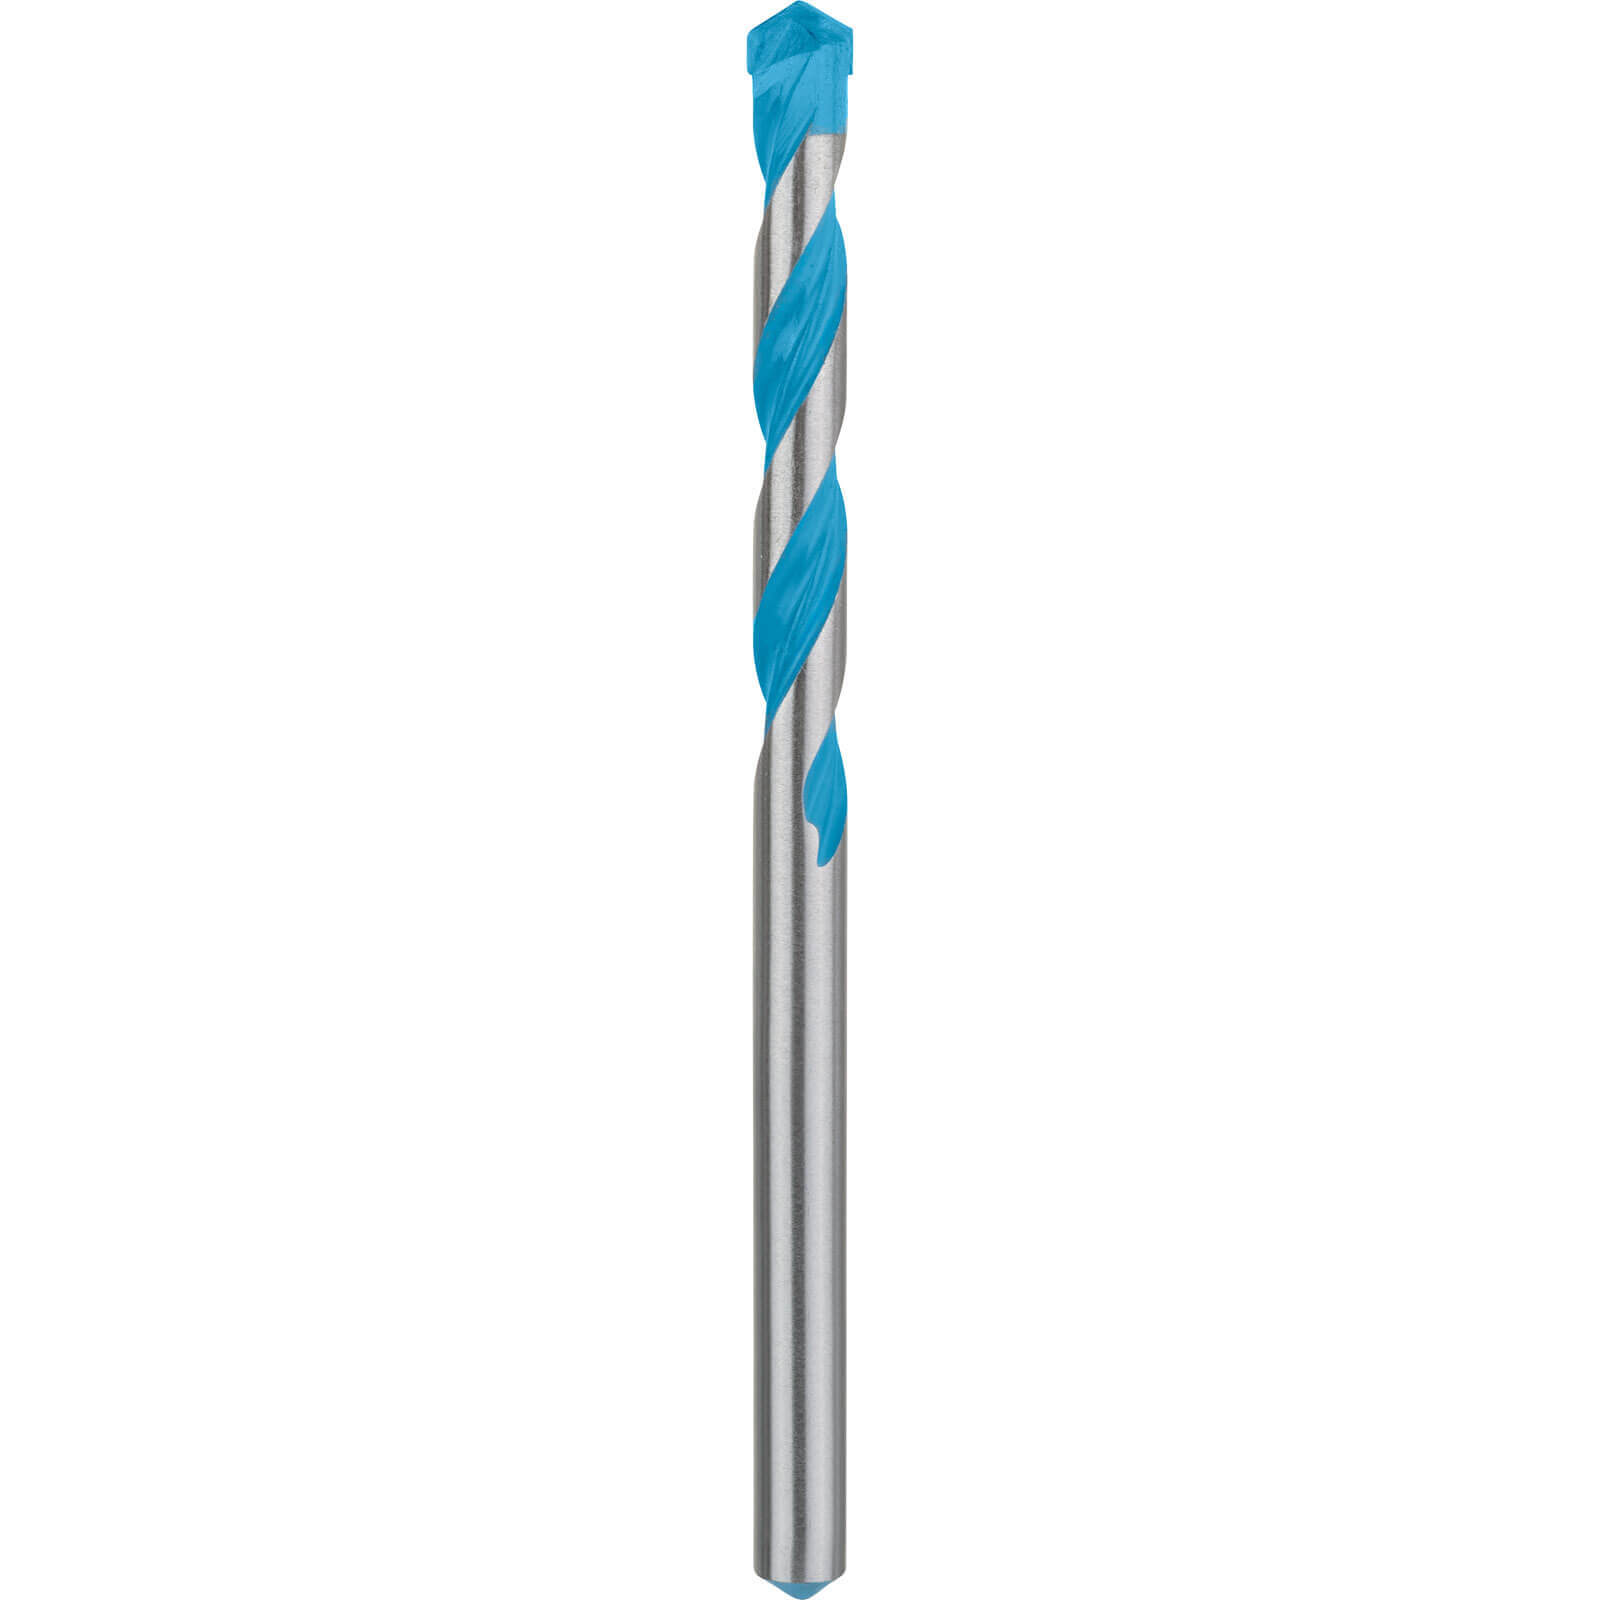 Image of Bosch Expert CYL-9 Multi Construction Drill Bit 10mm 150mm Pack of 1